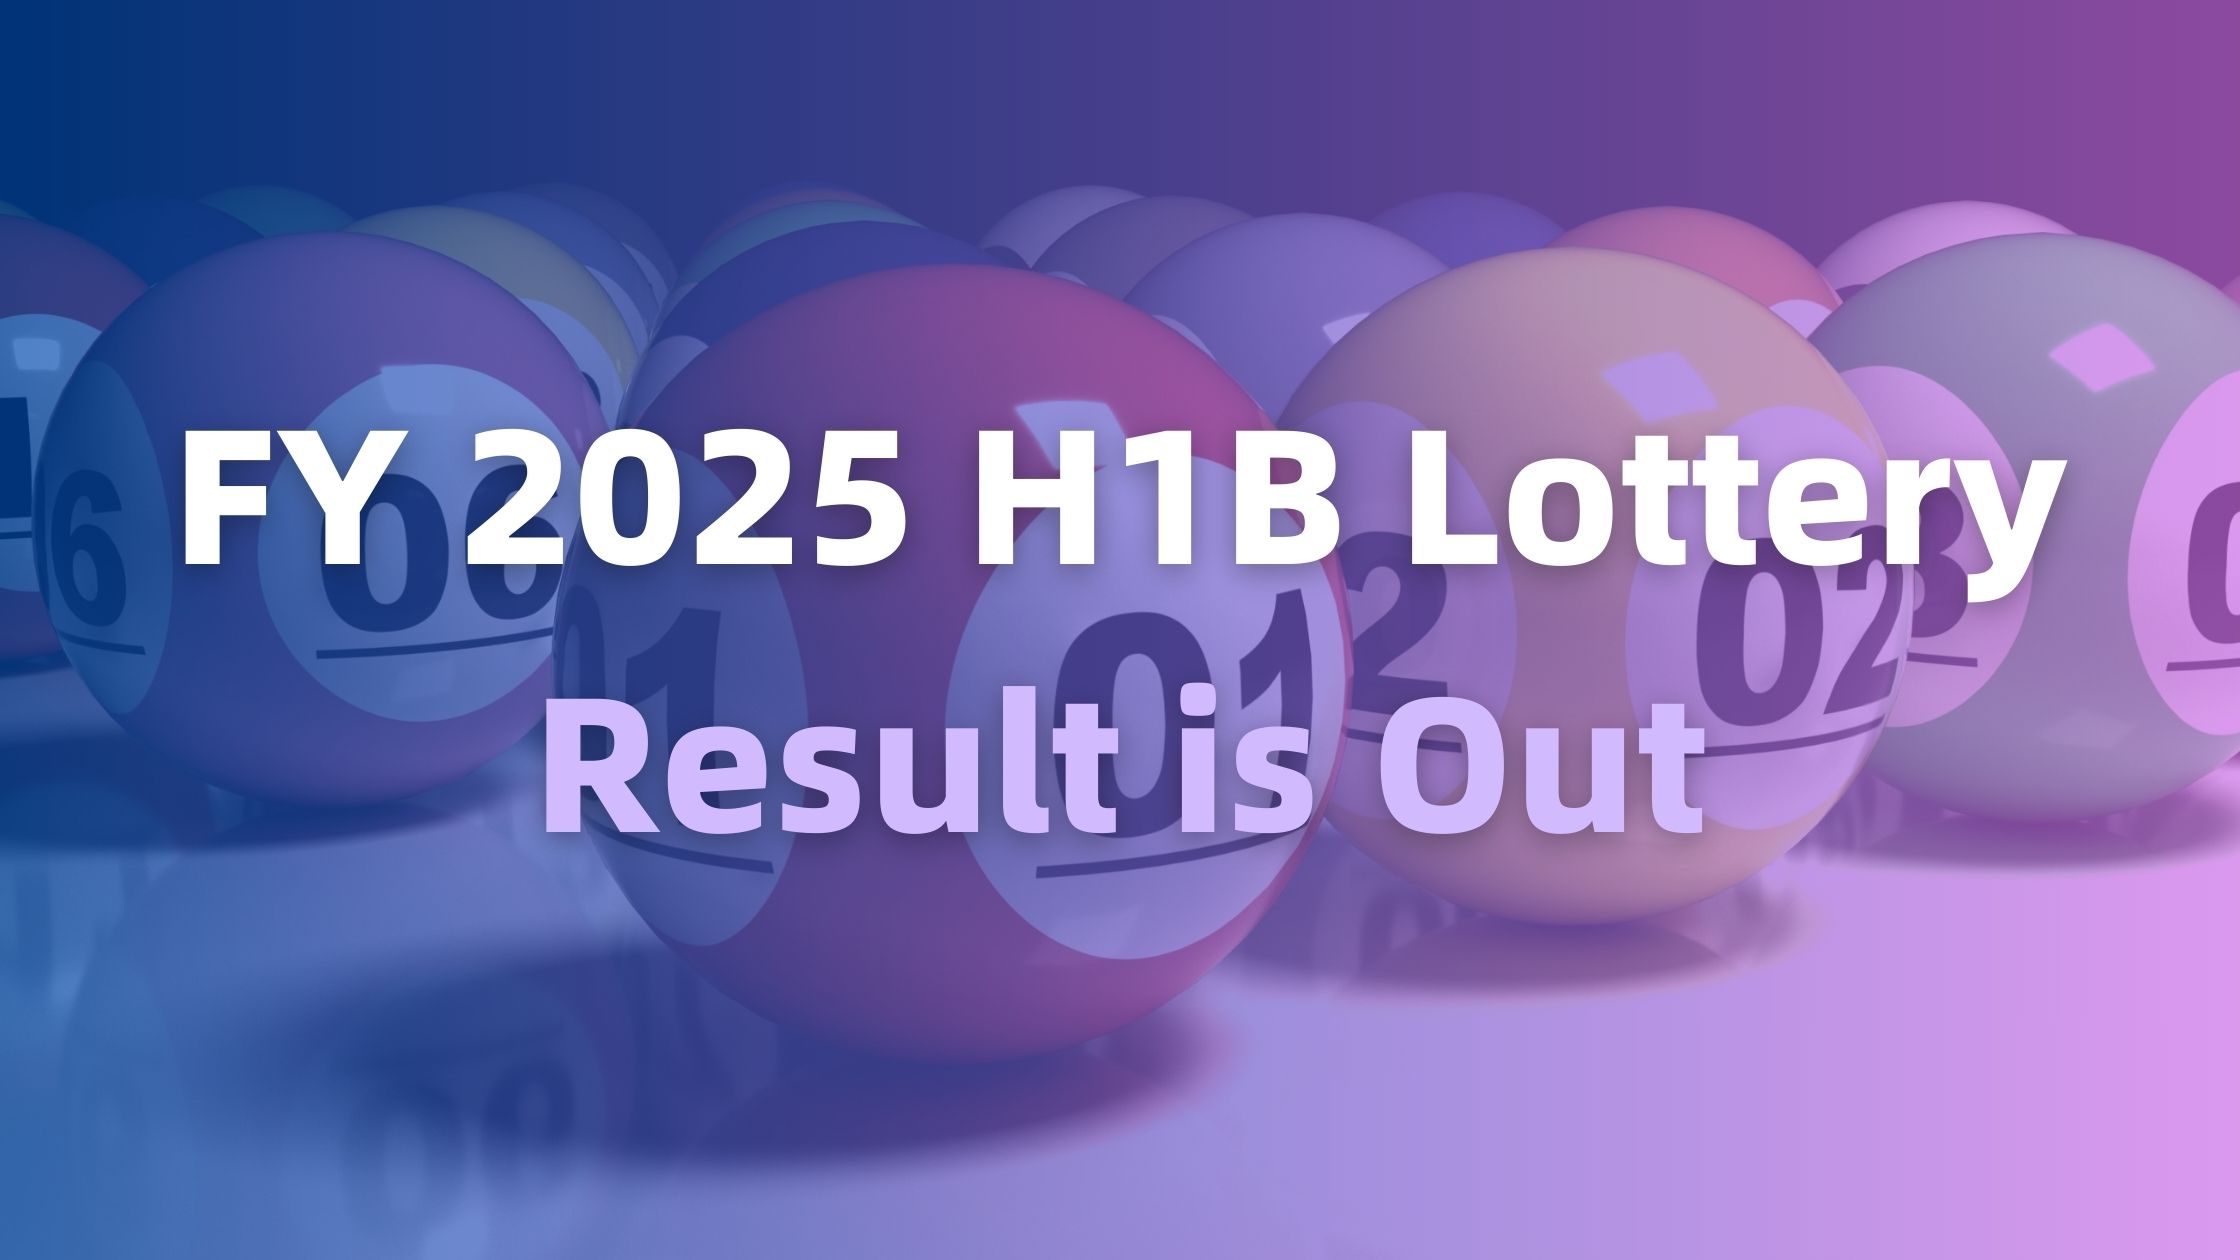 H1B Lottery is Out